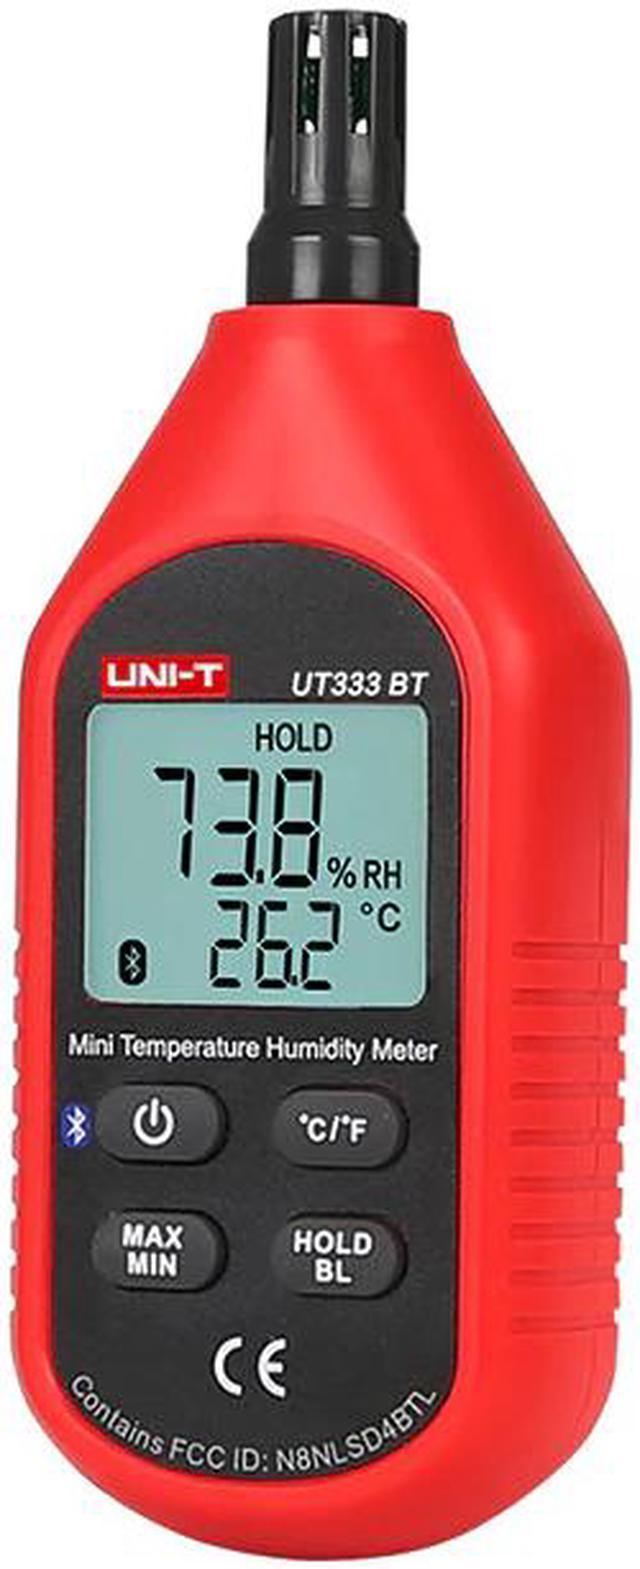 Mini Temperature Humidity Meter, Wall Hanging Temperature Humidity Tester,  with Thin Transparent Dial, Easy to Read Scale, Measure The Temperature and